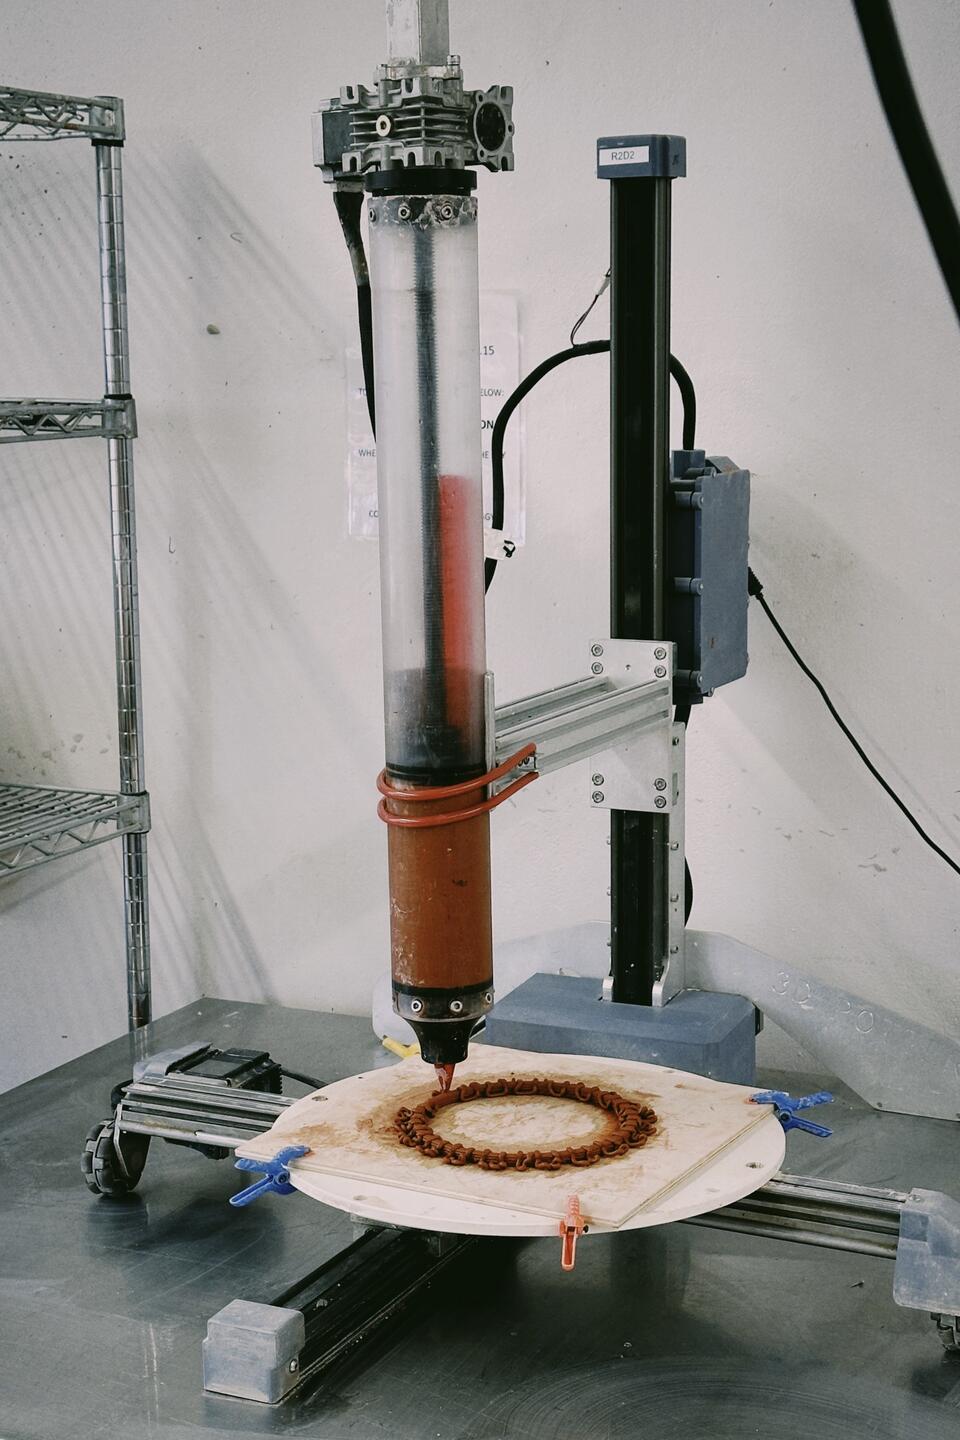 3D printer extruding a circular clay pattern on a rotating platform, with the printer labeled 'R2D2' in a workshop setting.